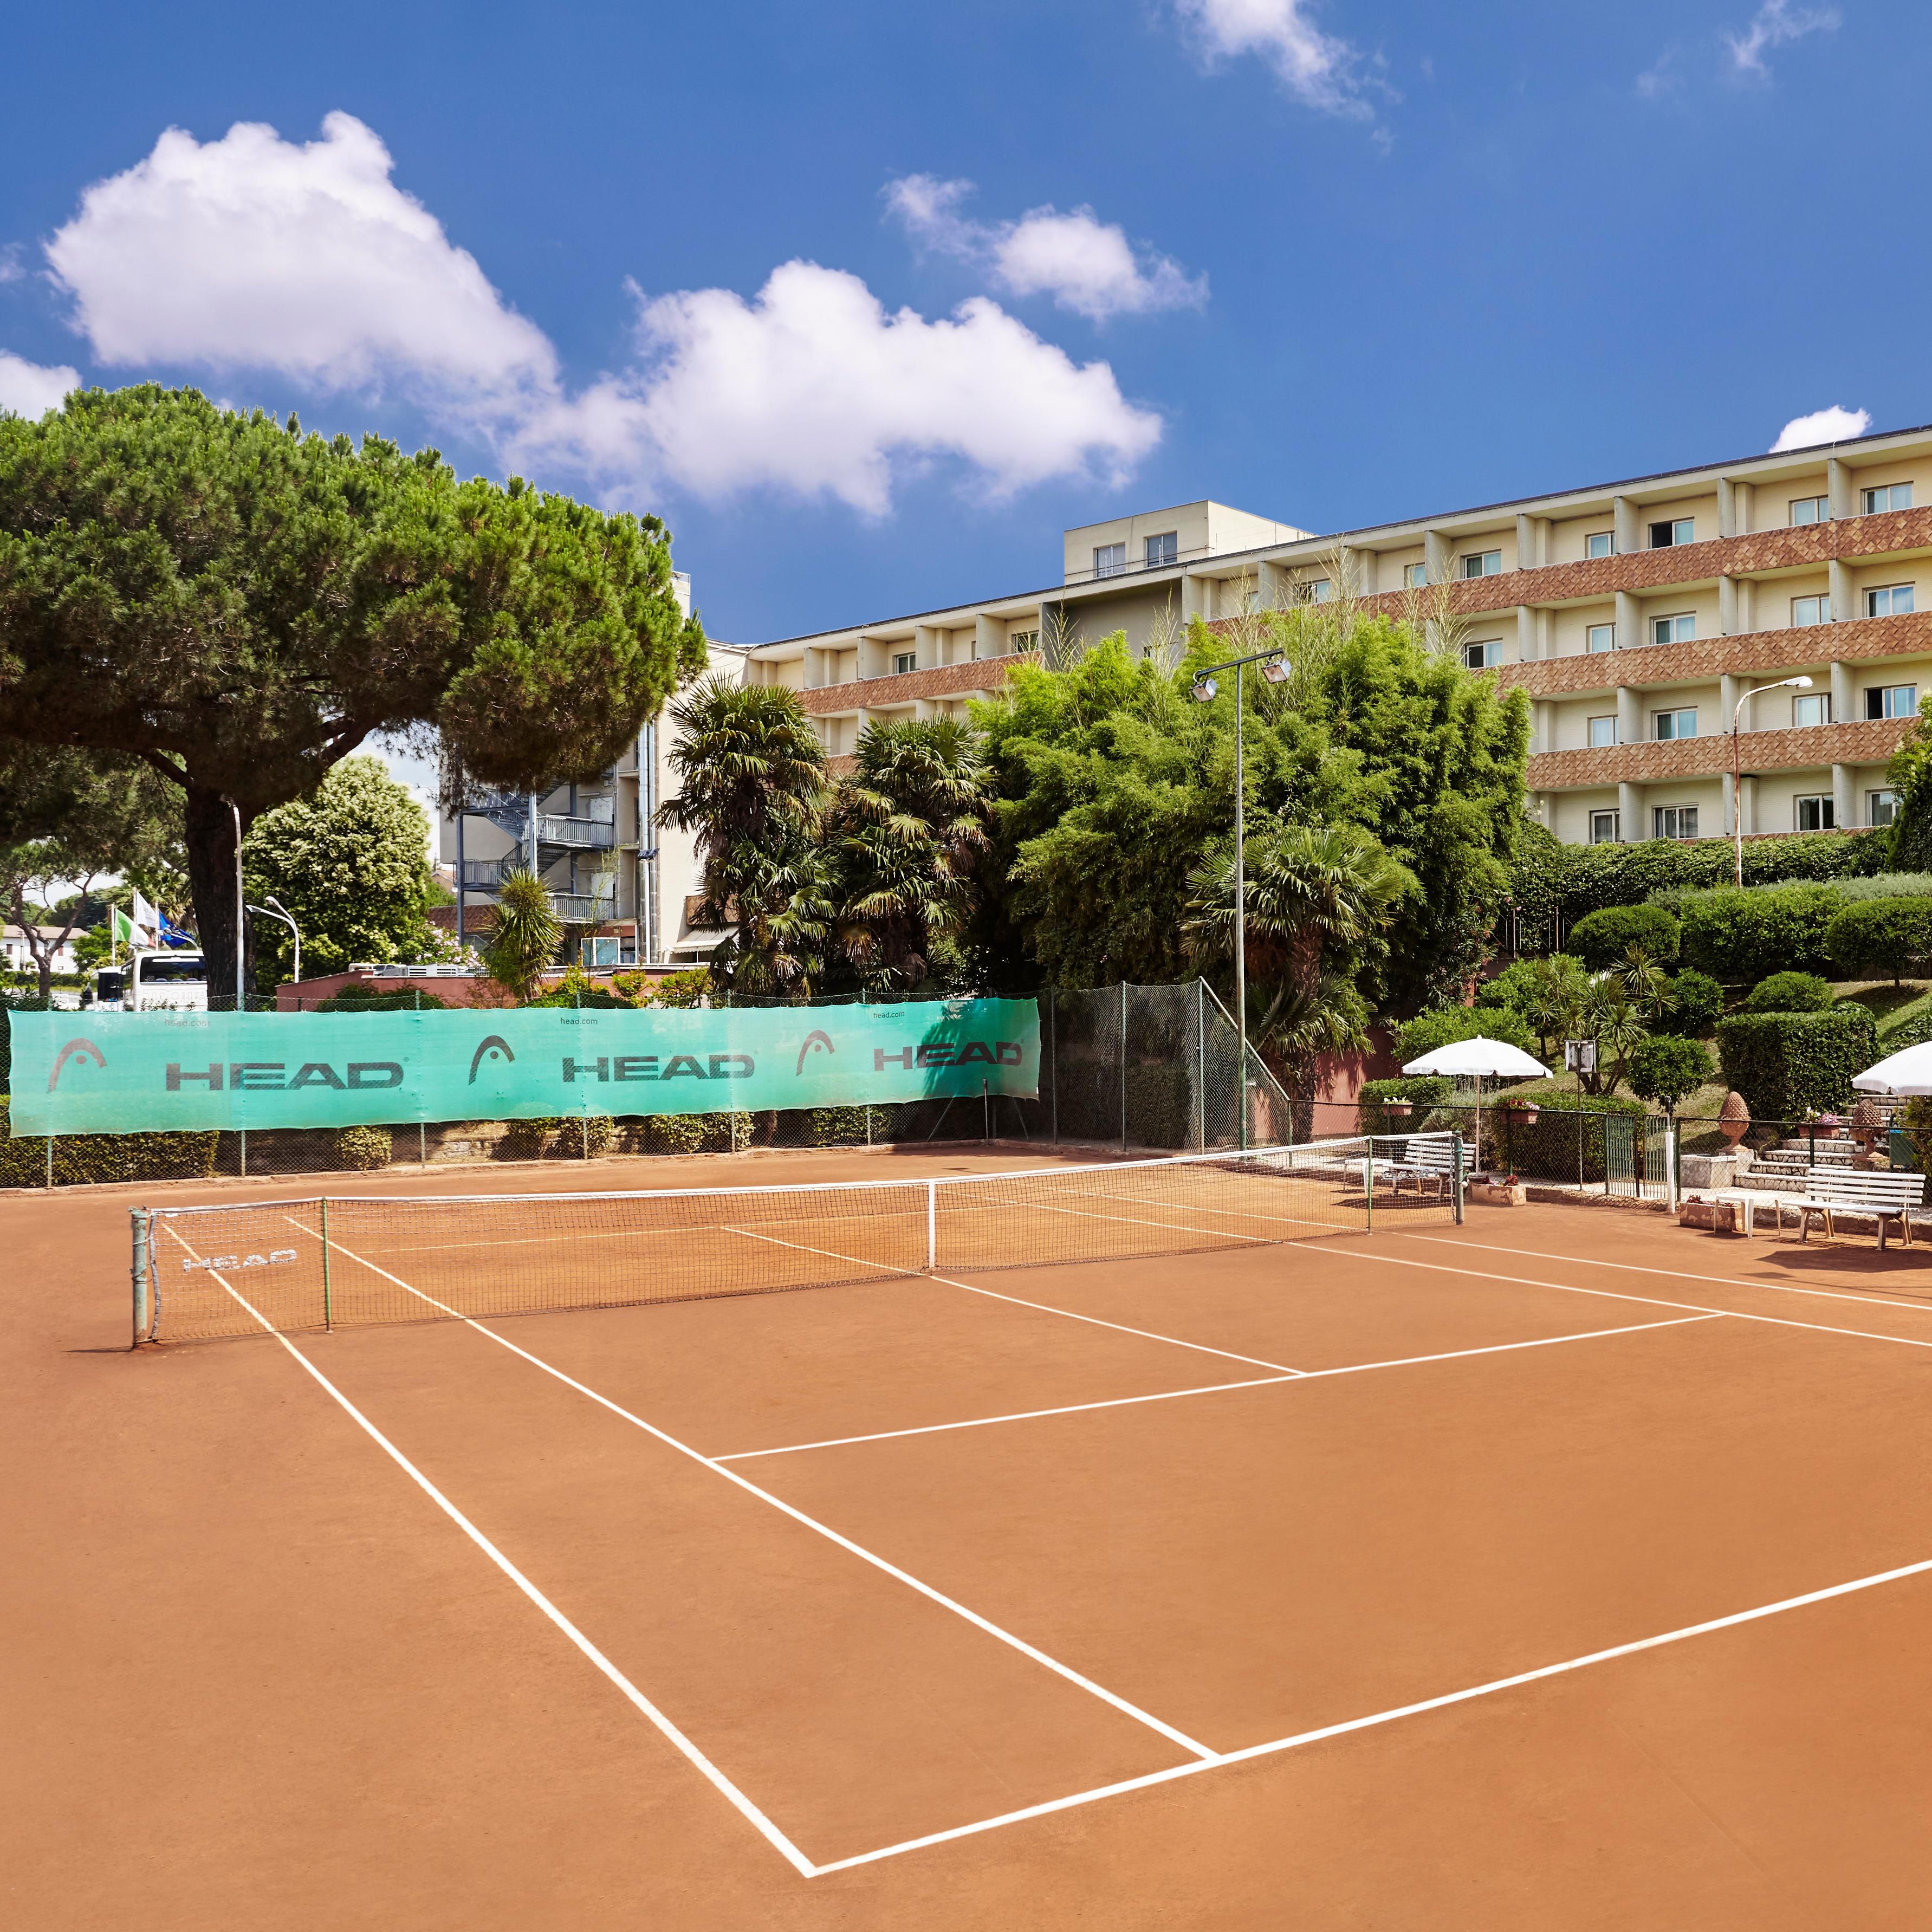 Take advantage of our 2 tennis courts while staying at the hotel